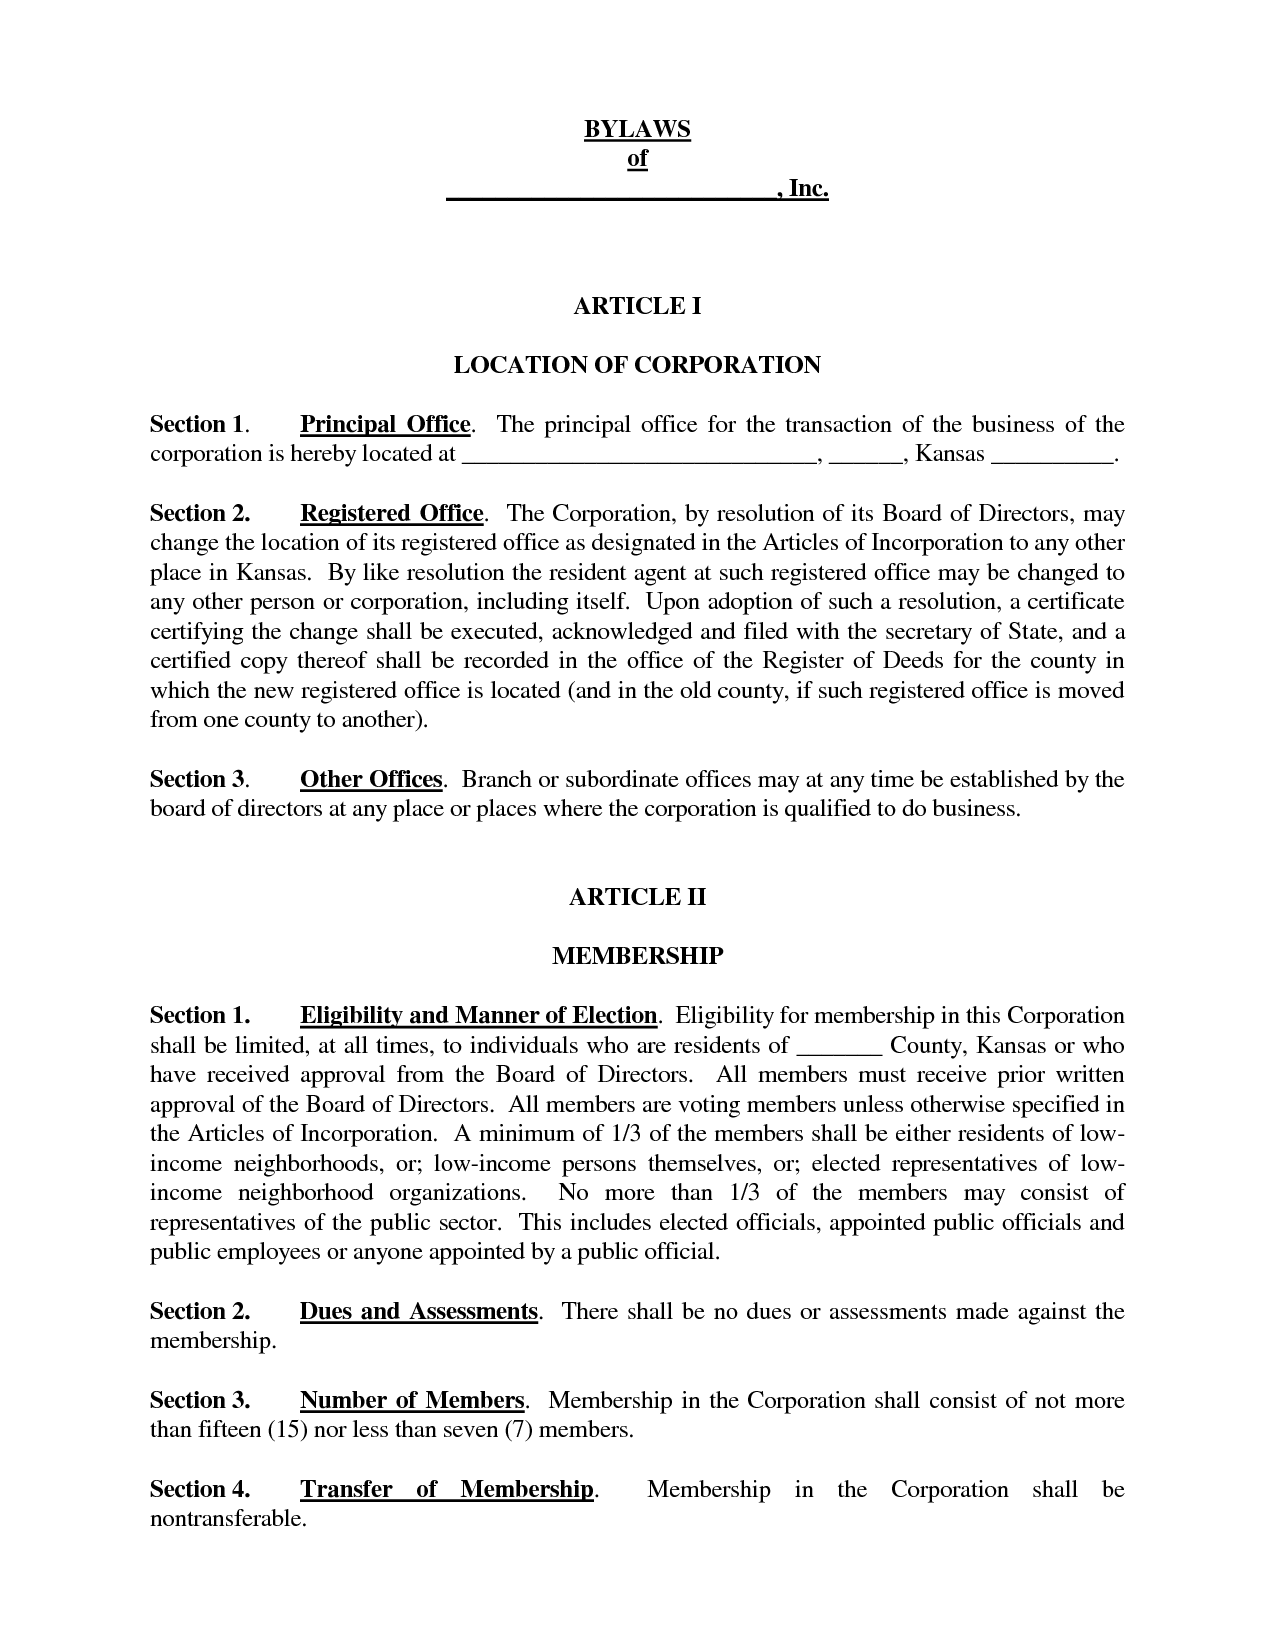 corporation-bylaws-corporate-bylaws-form-template